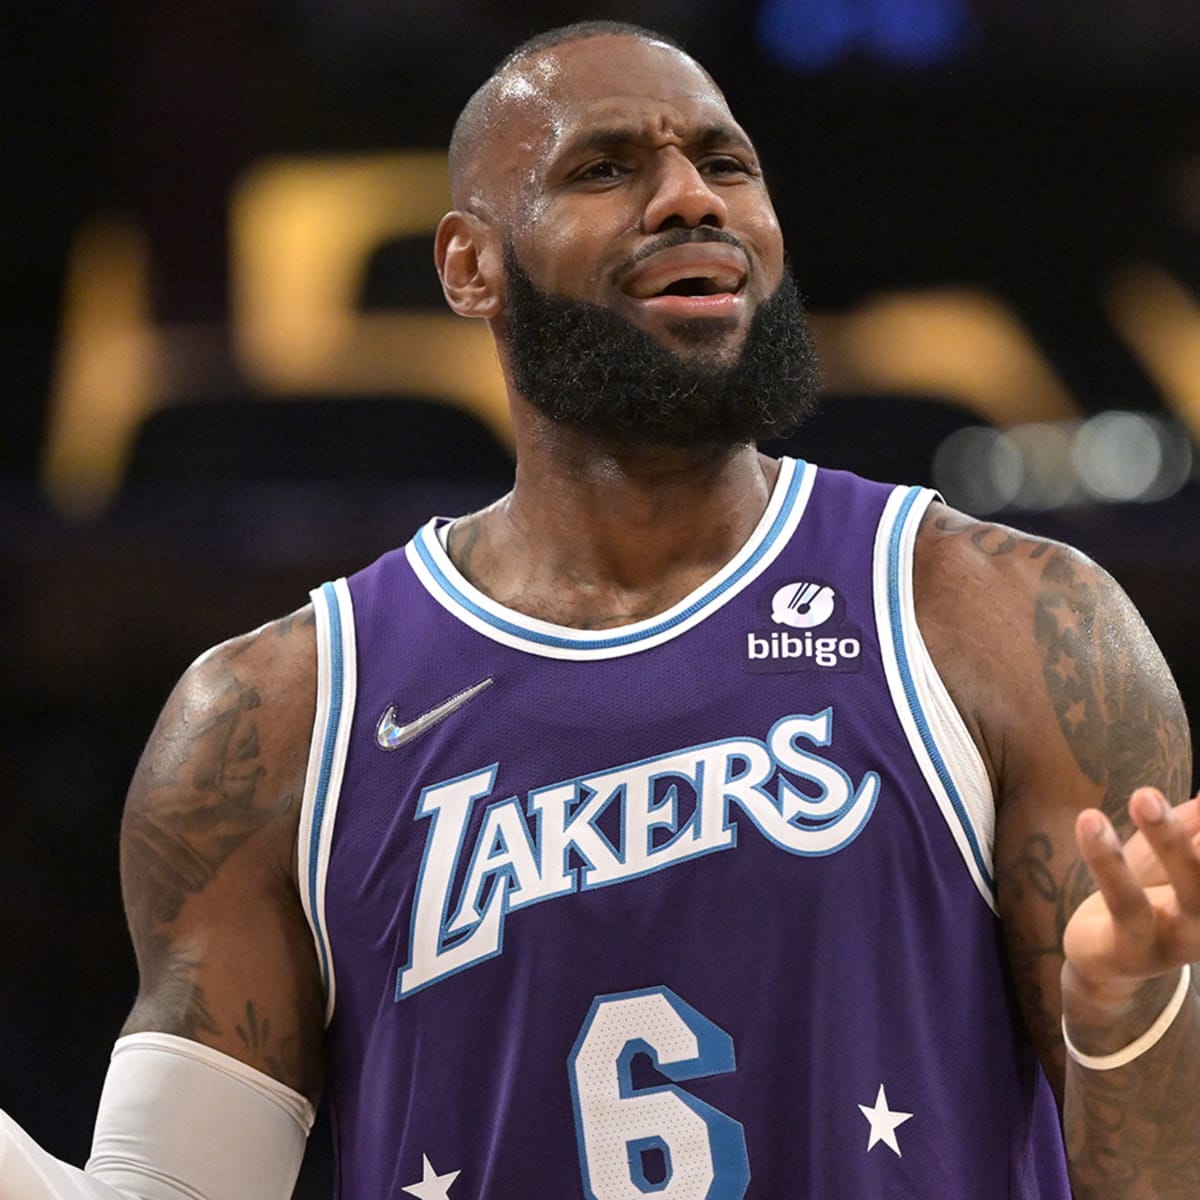 Lakers News: LeBron James, Anthony Davis May Change Jersey Numbers For  2021-22 Season